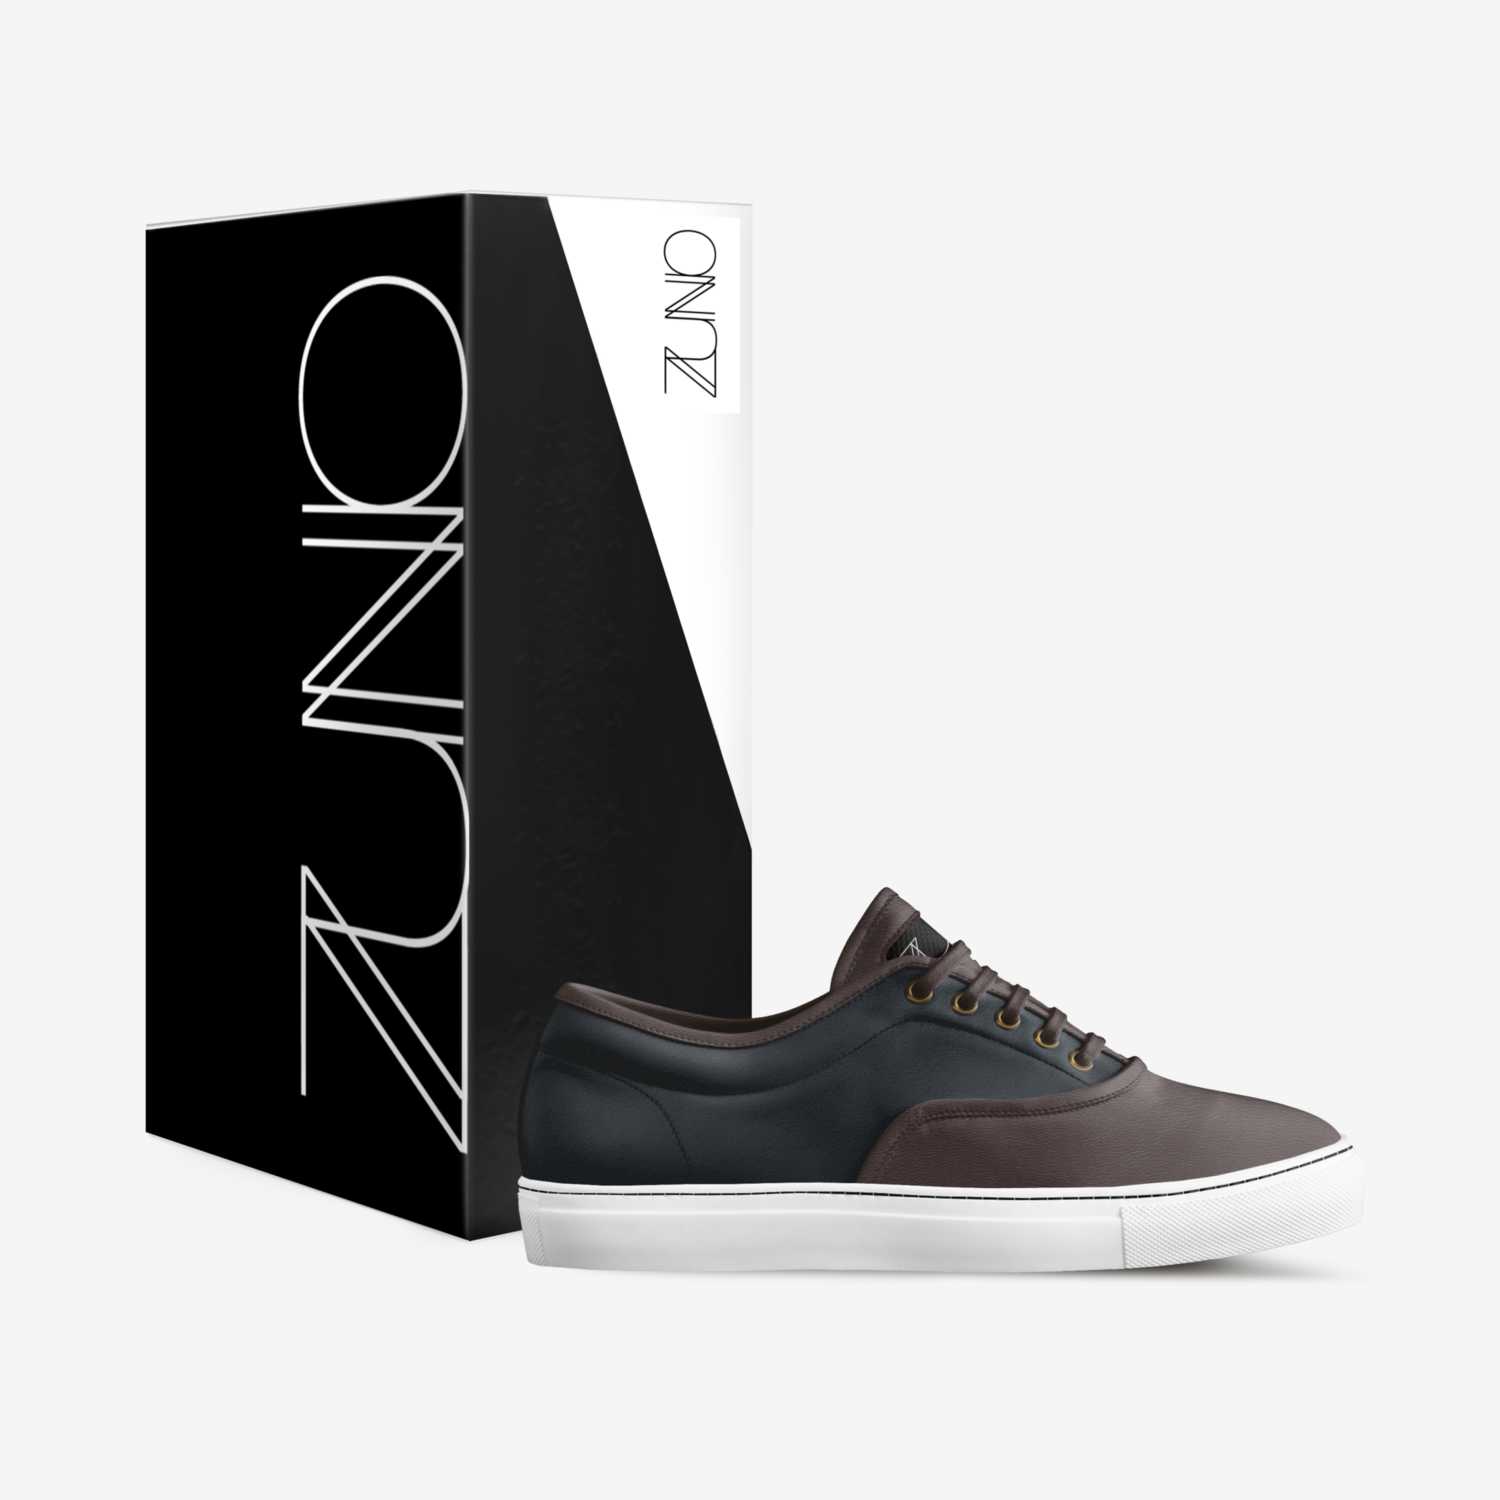 Zuno custom made in Italy shoes by Stuart Nombluez | Box view